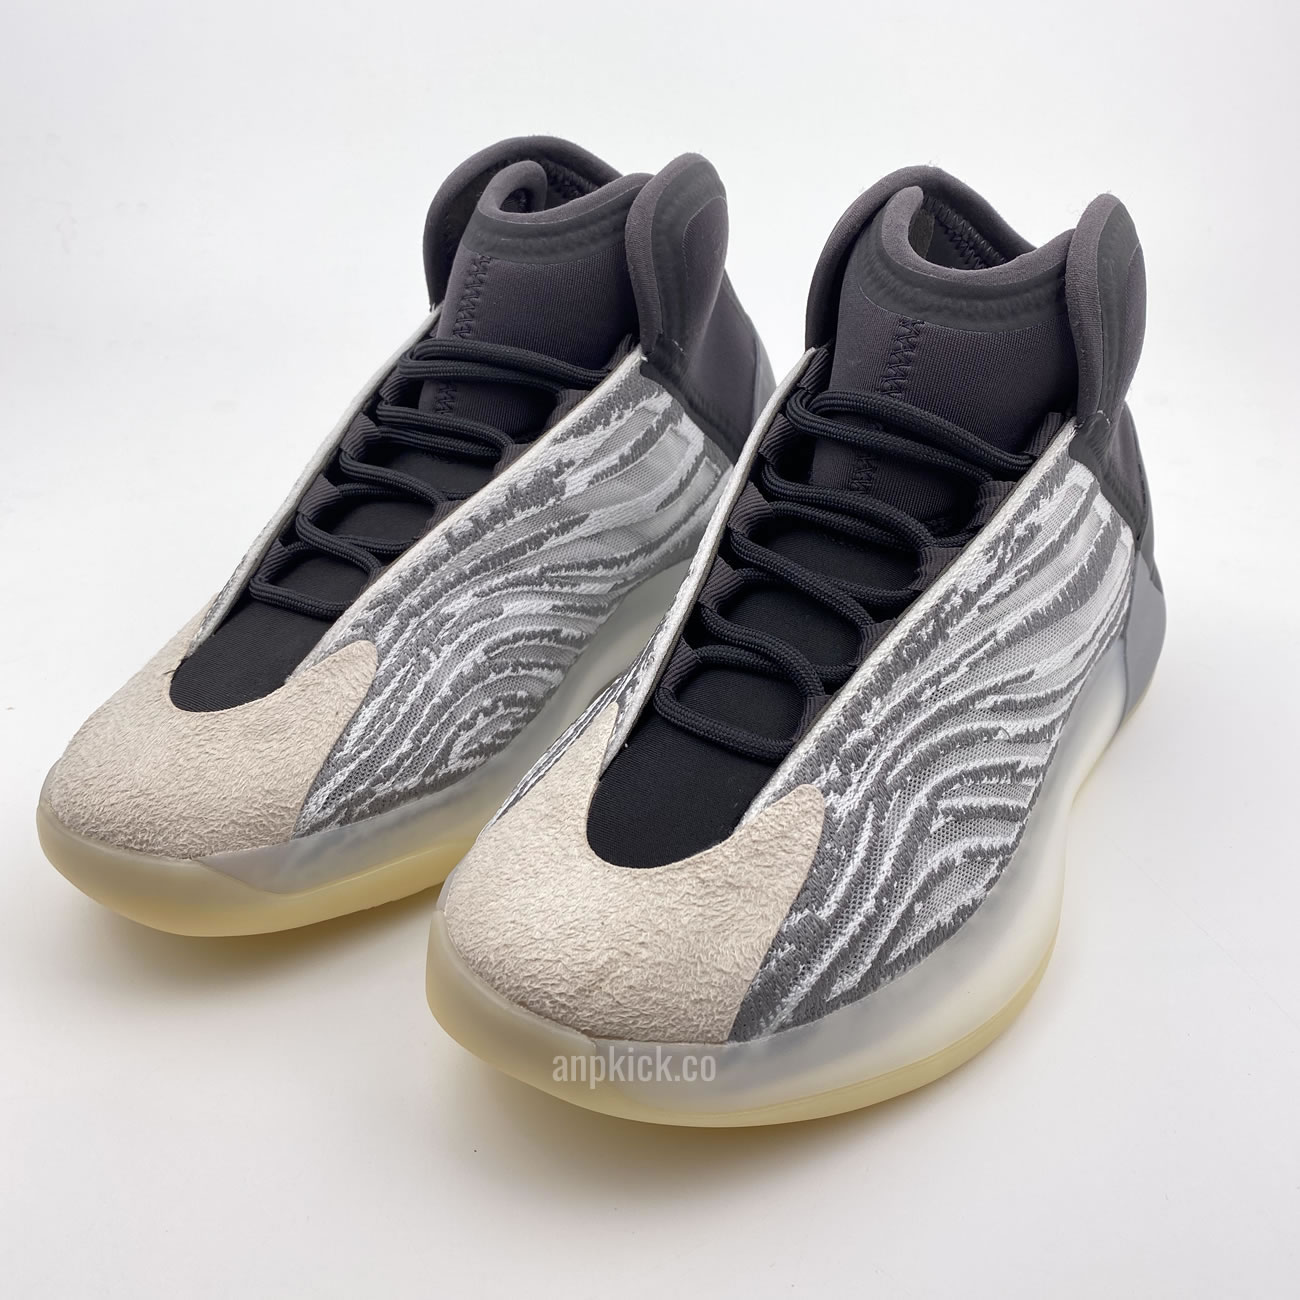 Adidas Yeezy Basketball Quantum Boost For Sale New Release Eg1535 (3) - newkick.org